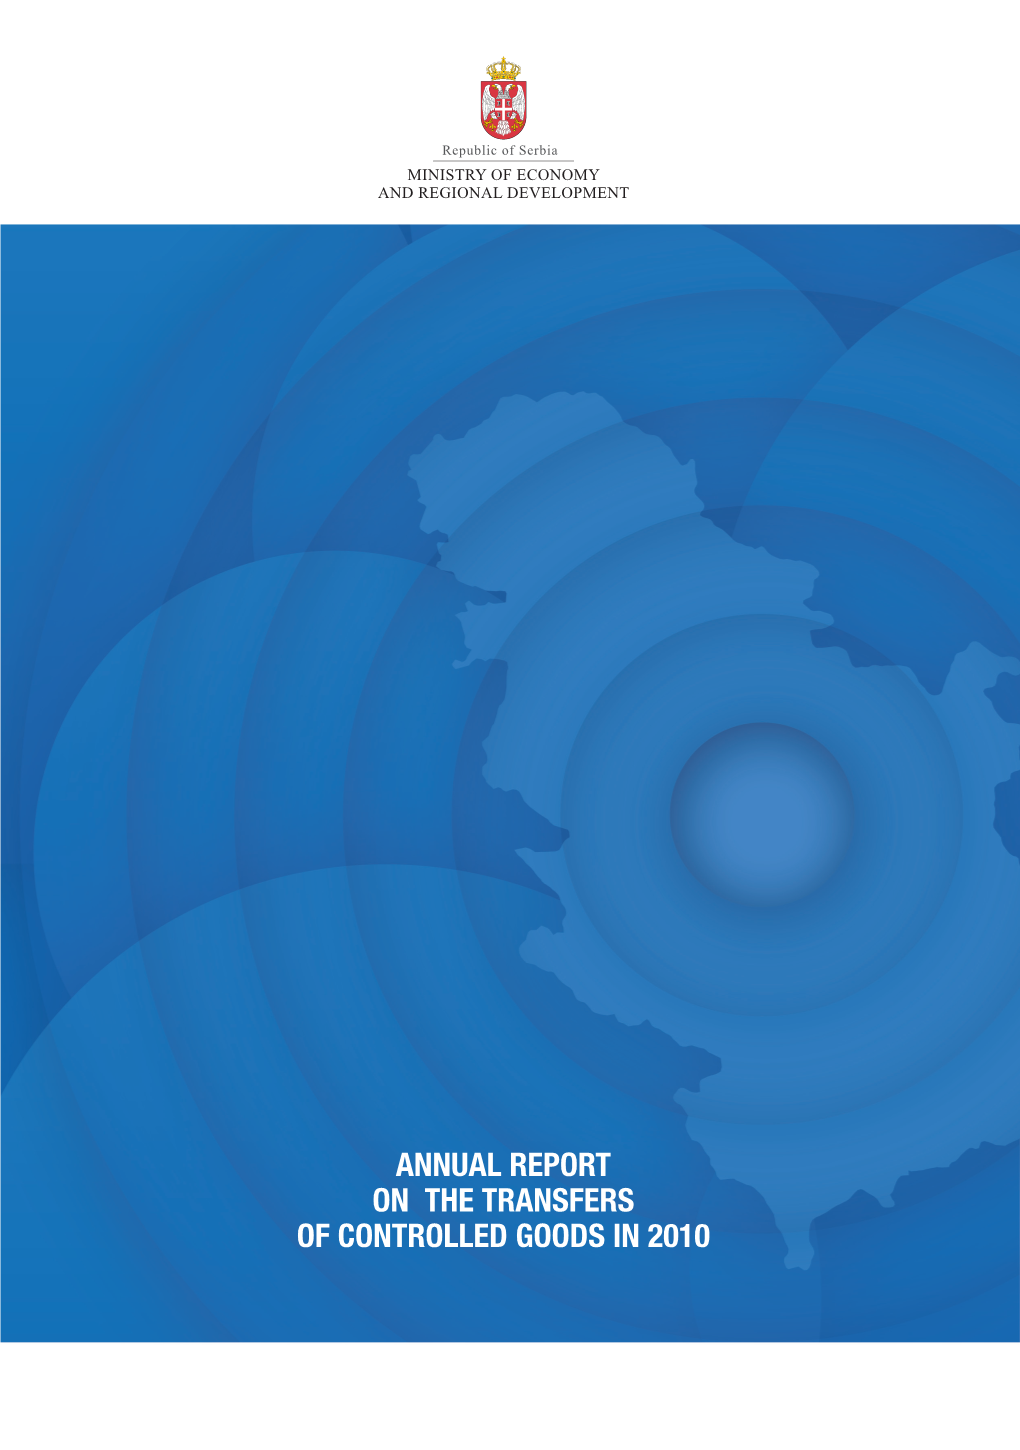 Annual Report on the Transfers of Controlled Goods in 2010